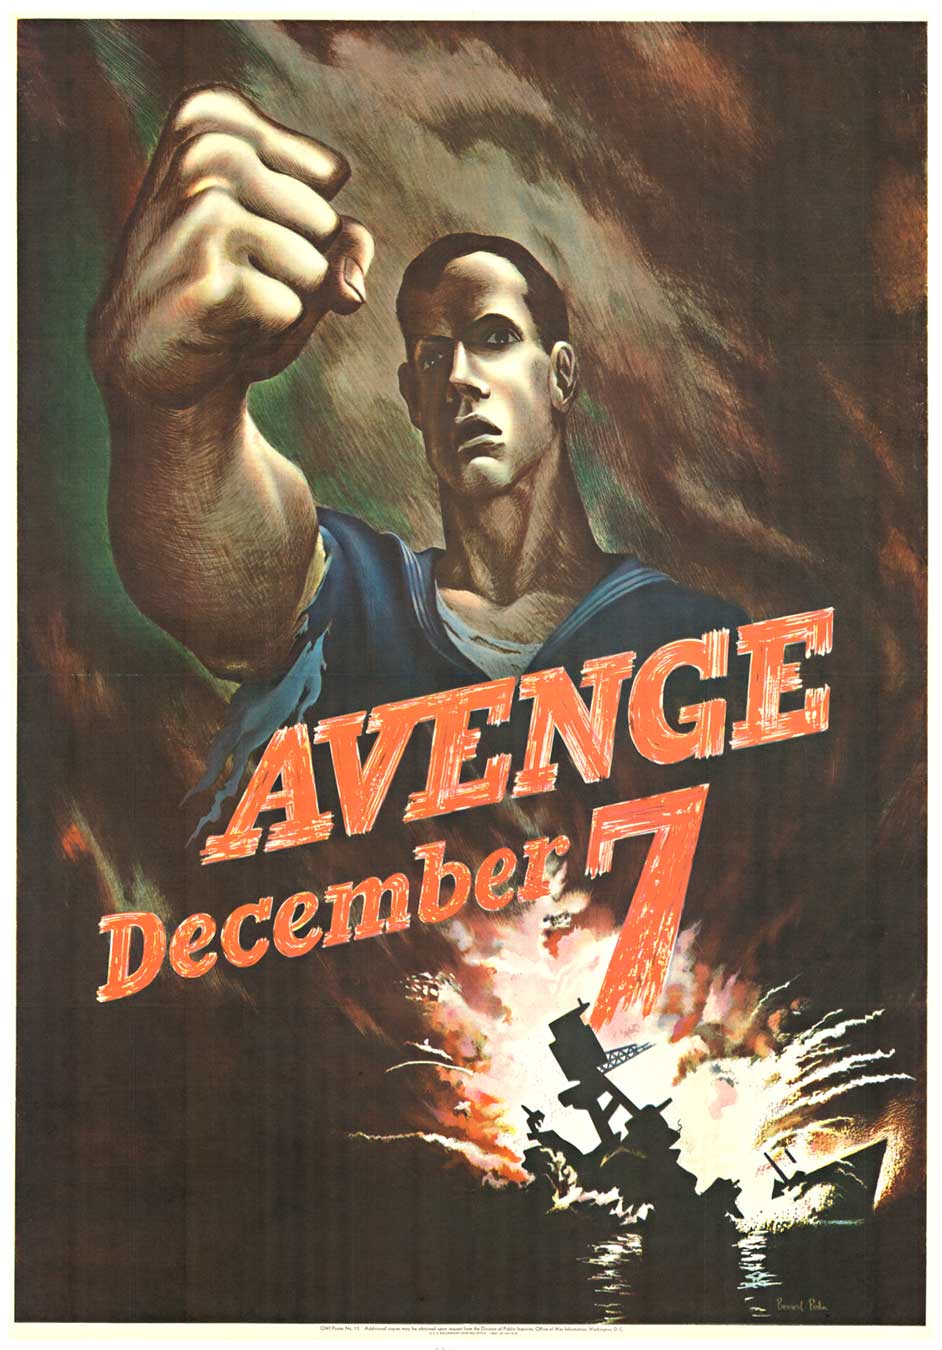 man with his fist. Bombs exploding, ships sinking, December 7, war poster, military psoter, World War II